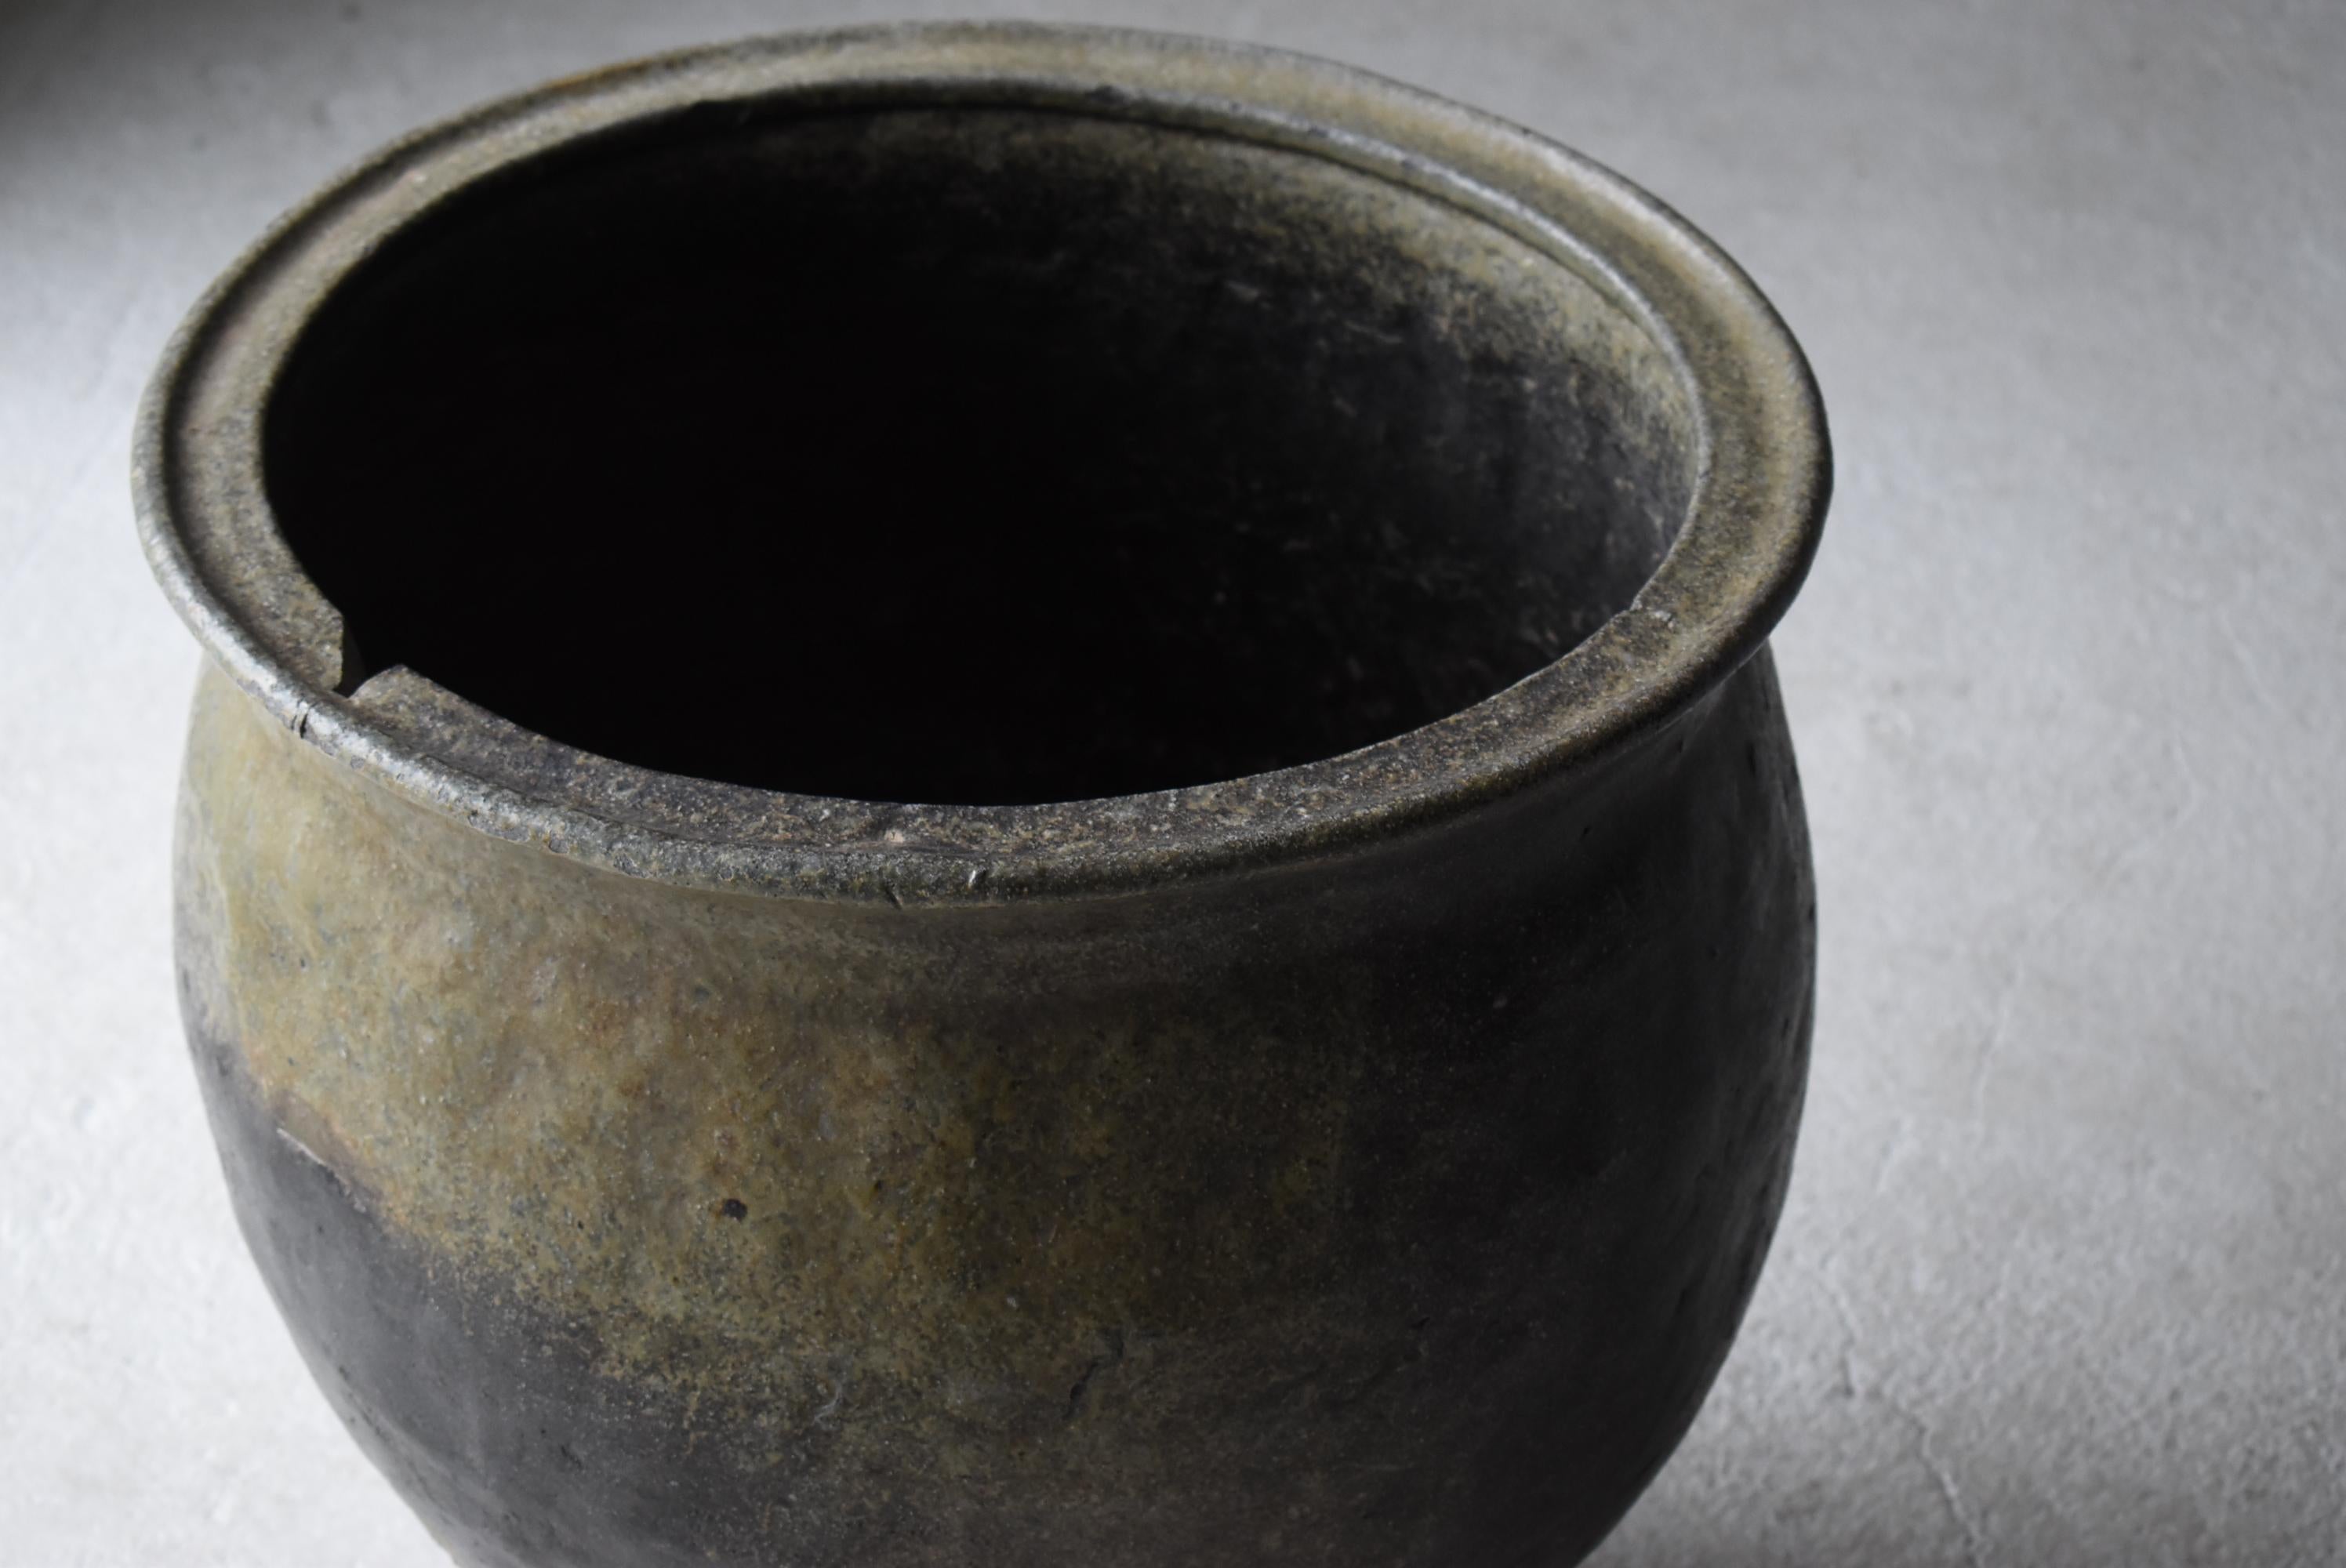 It is a jar baked in Japan's TOKONAME (Aichi Prefecture).
The era seems to be the Edo period (1750-1860).

In Japan, this jar was used to carry water.

It's done its job, but it's enough to put it aside and look at it.

Even in Japan, such